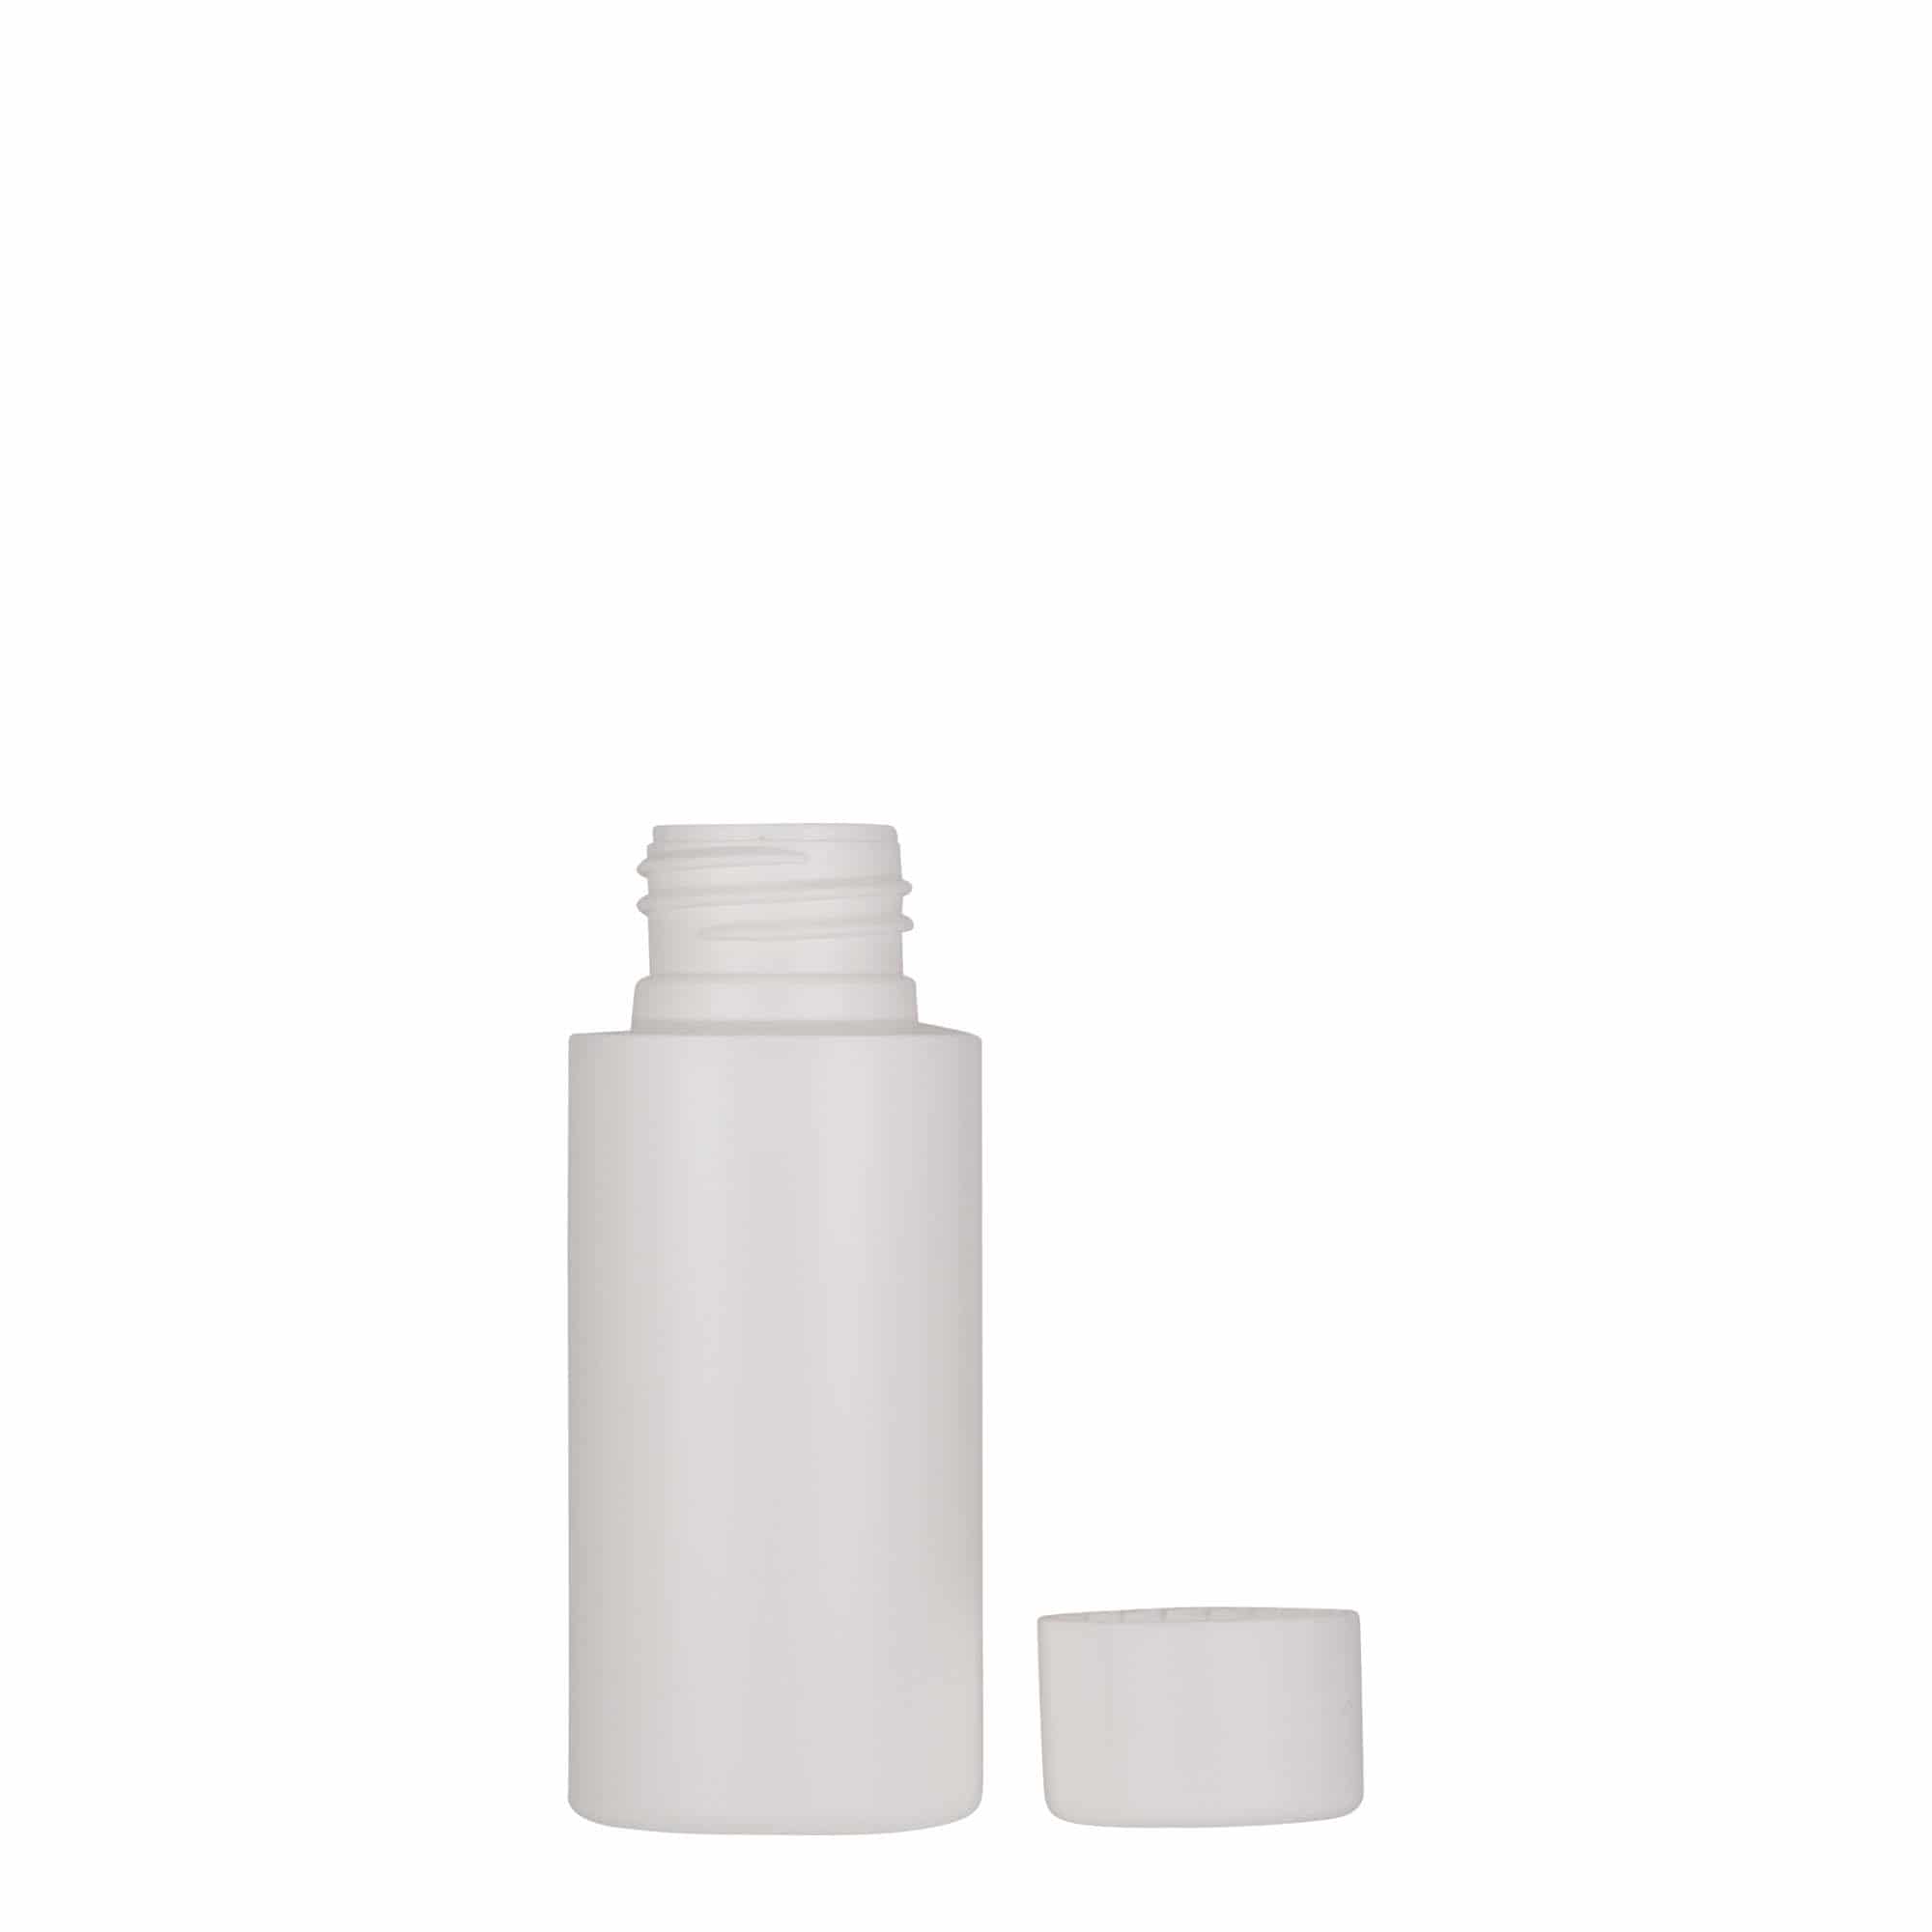 Bouteille en plastique 50 ml 'Pipe', Green PEHD, blanche, col : GPI 24/410